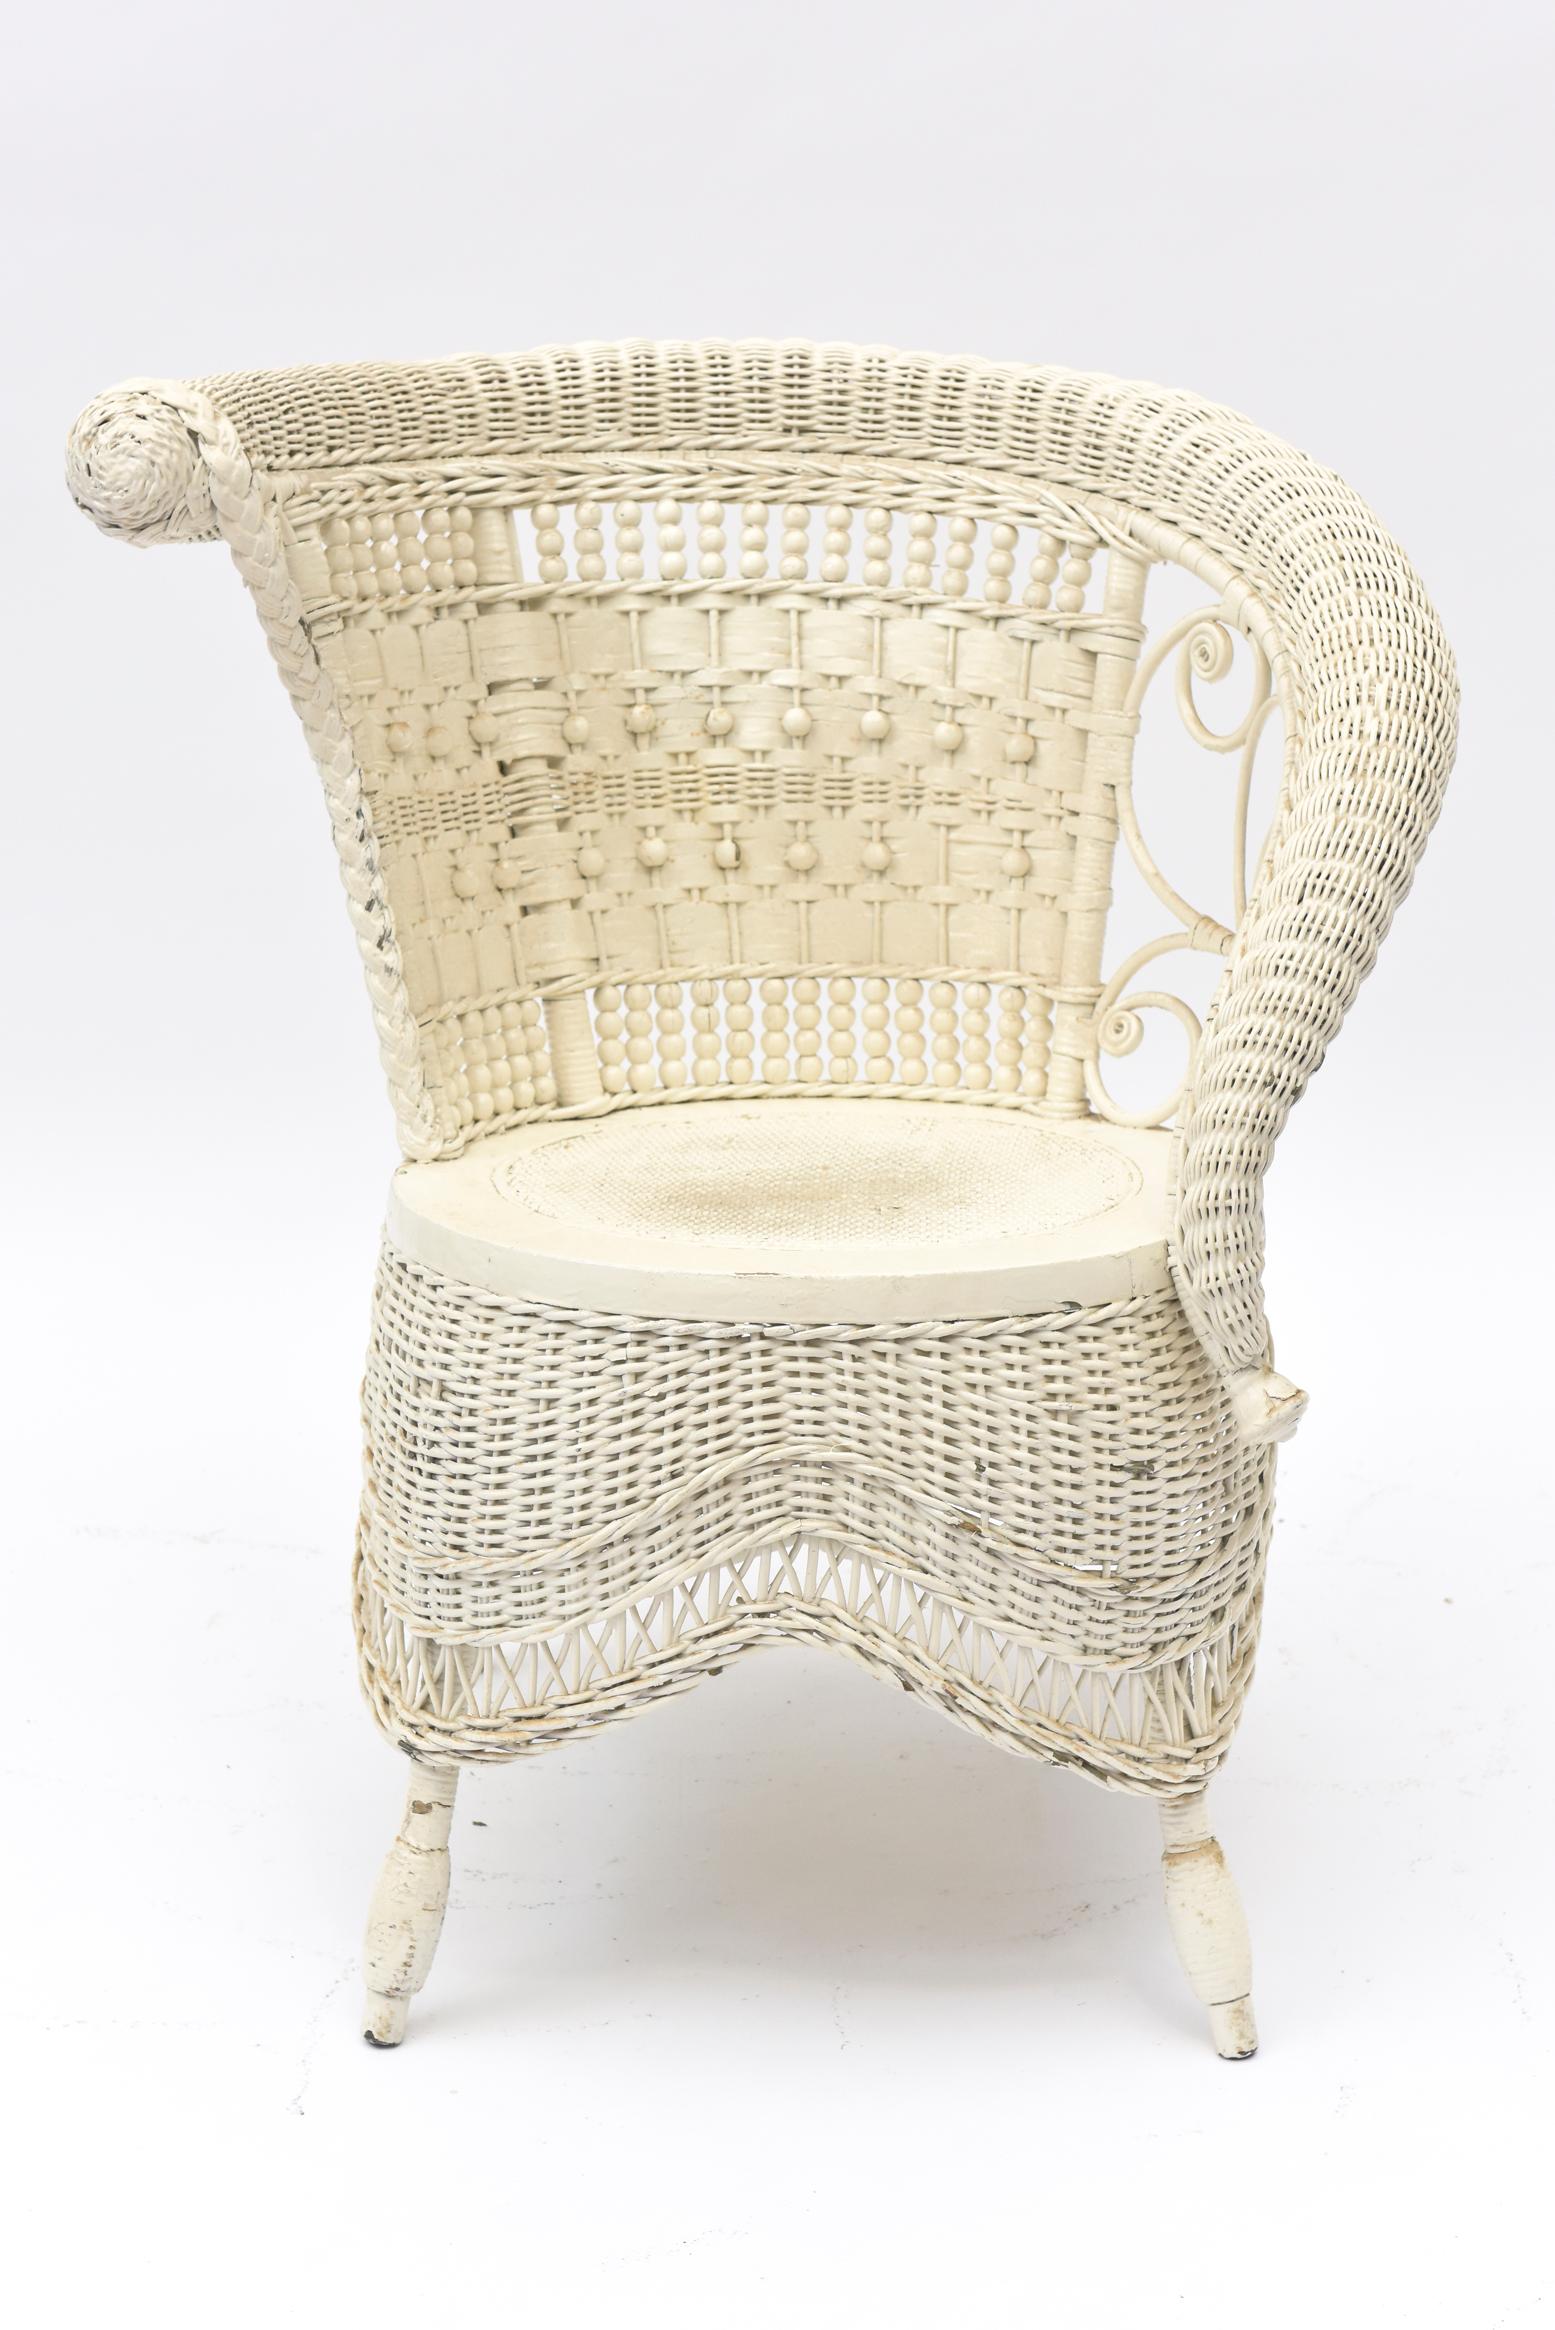 Part of a large collection of ornate Victorian wicker that was collected over the years by a Senator's wife. Elegant wicker portrait chair with rolled arm incorporates beading, lattice work, woven skirt, and woven beaded front legs. Whether it is